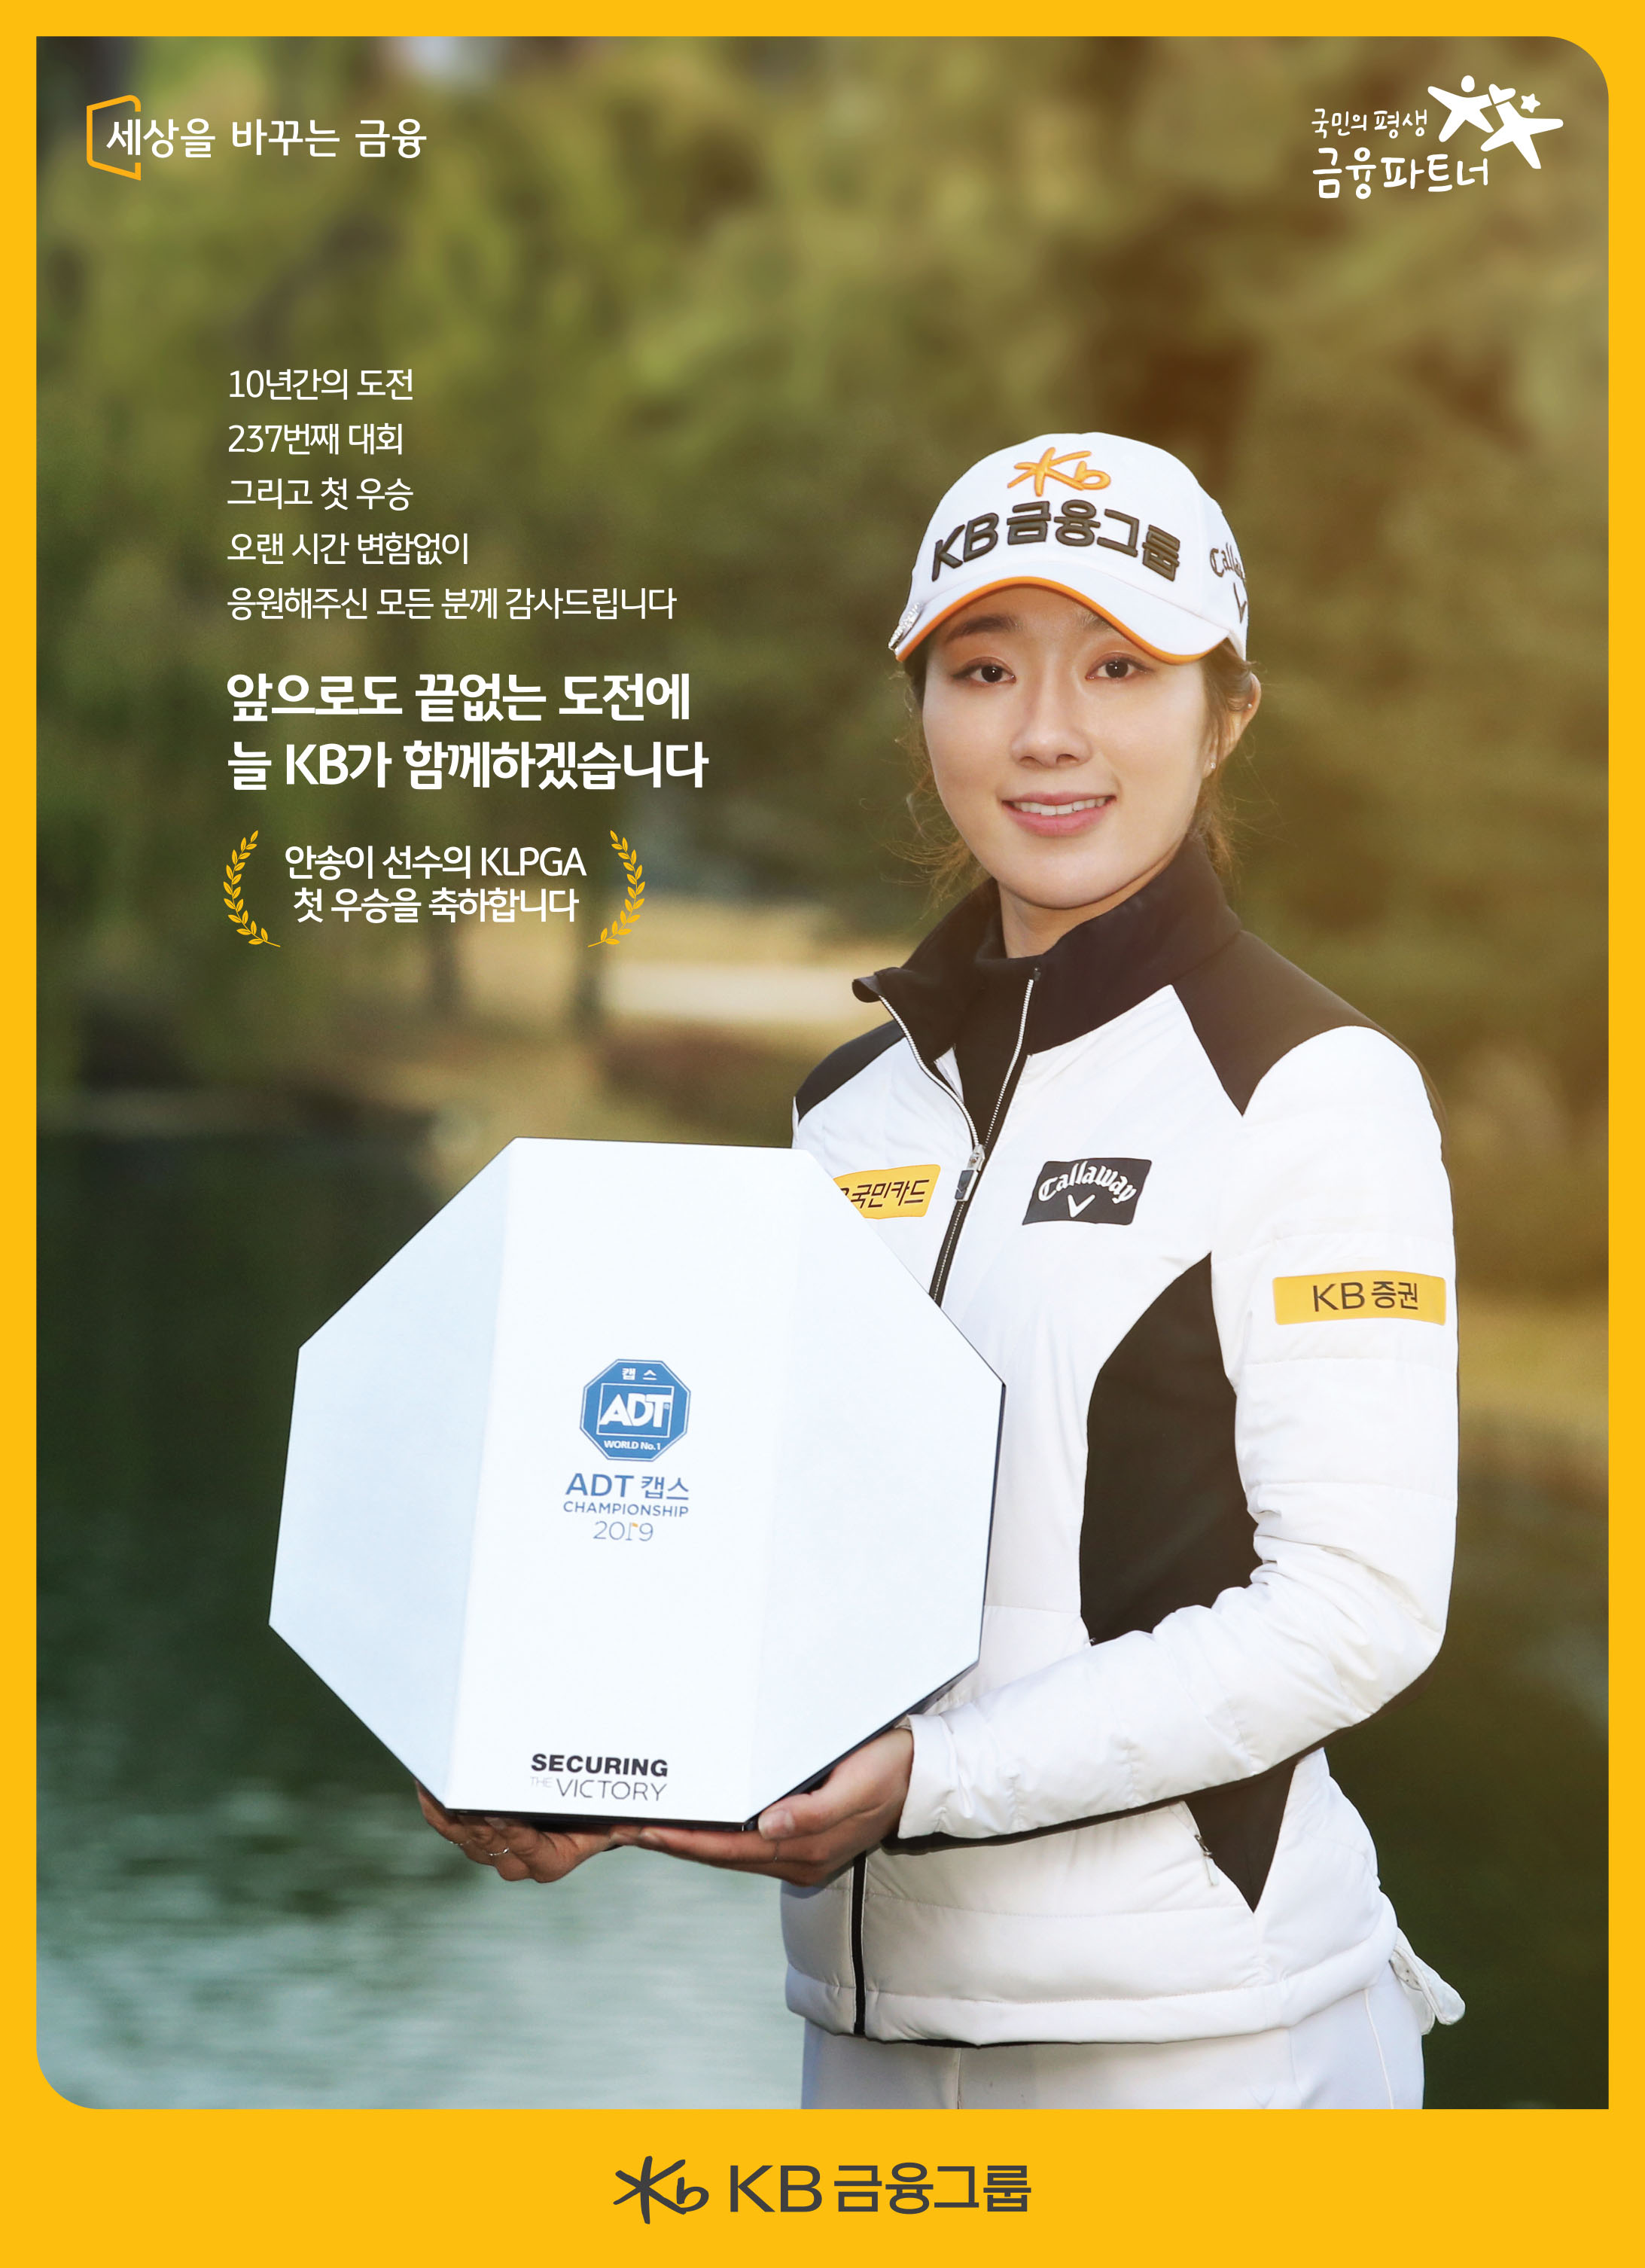 Congratulations to Song Yi Ahn’s the first victory in KLPGA